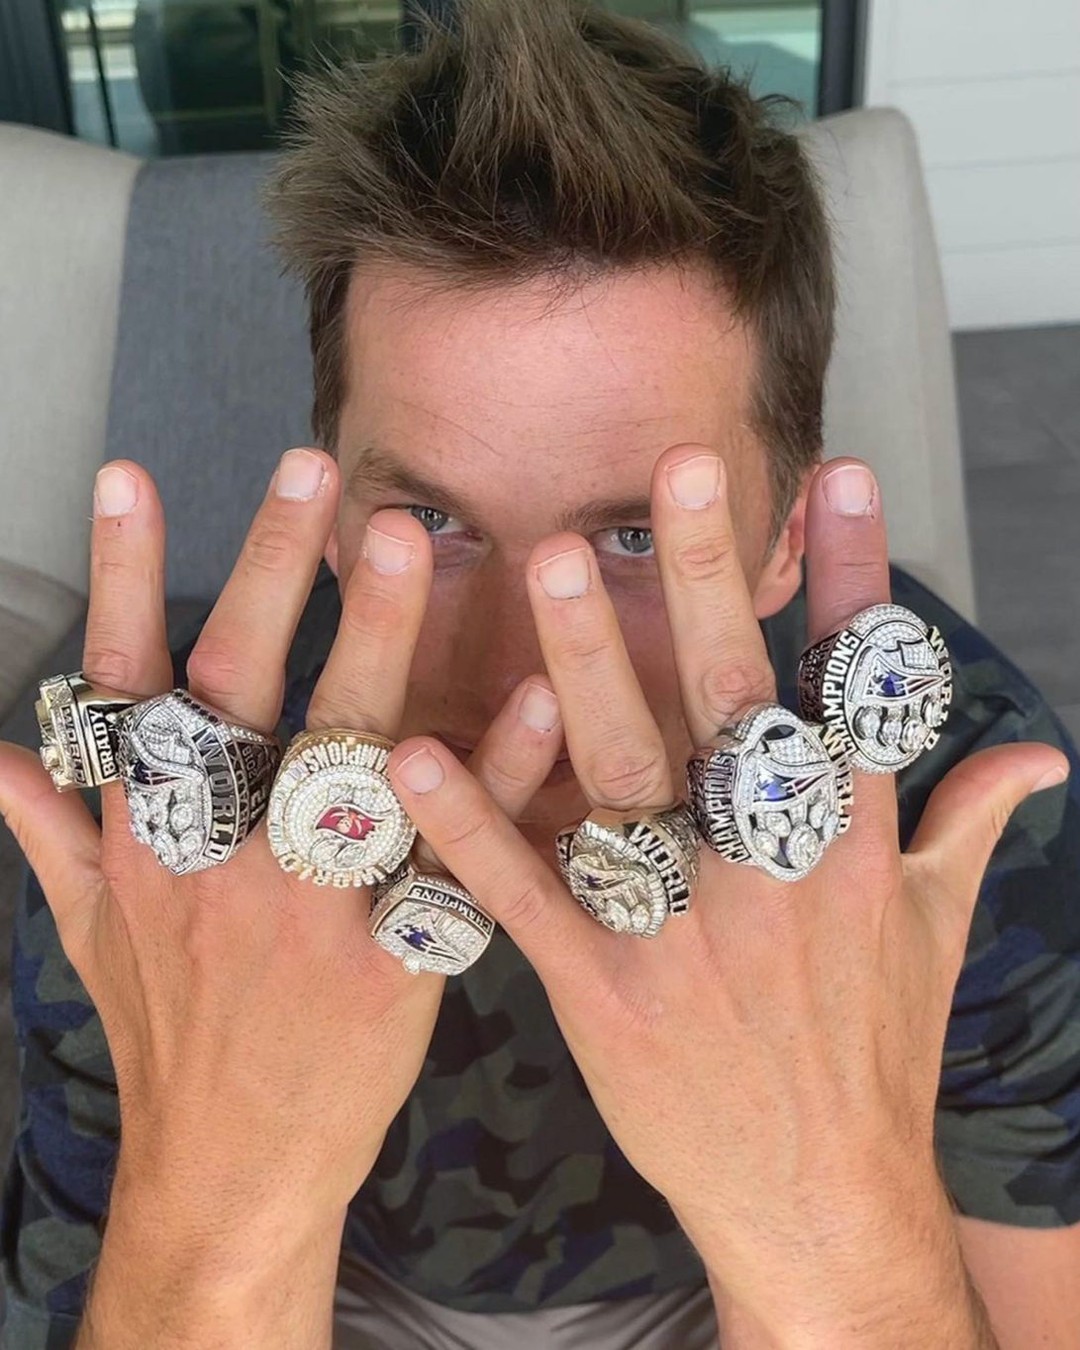 Patriots' Super Bowl ring contains 28-3 reference - Sports Illustrated